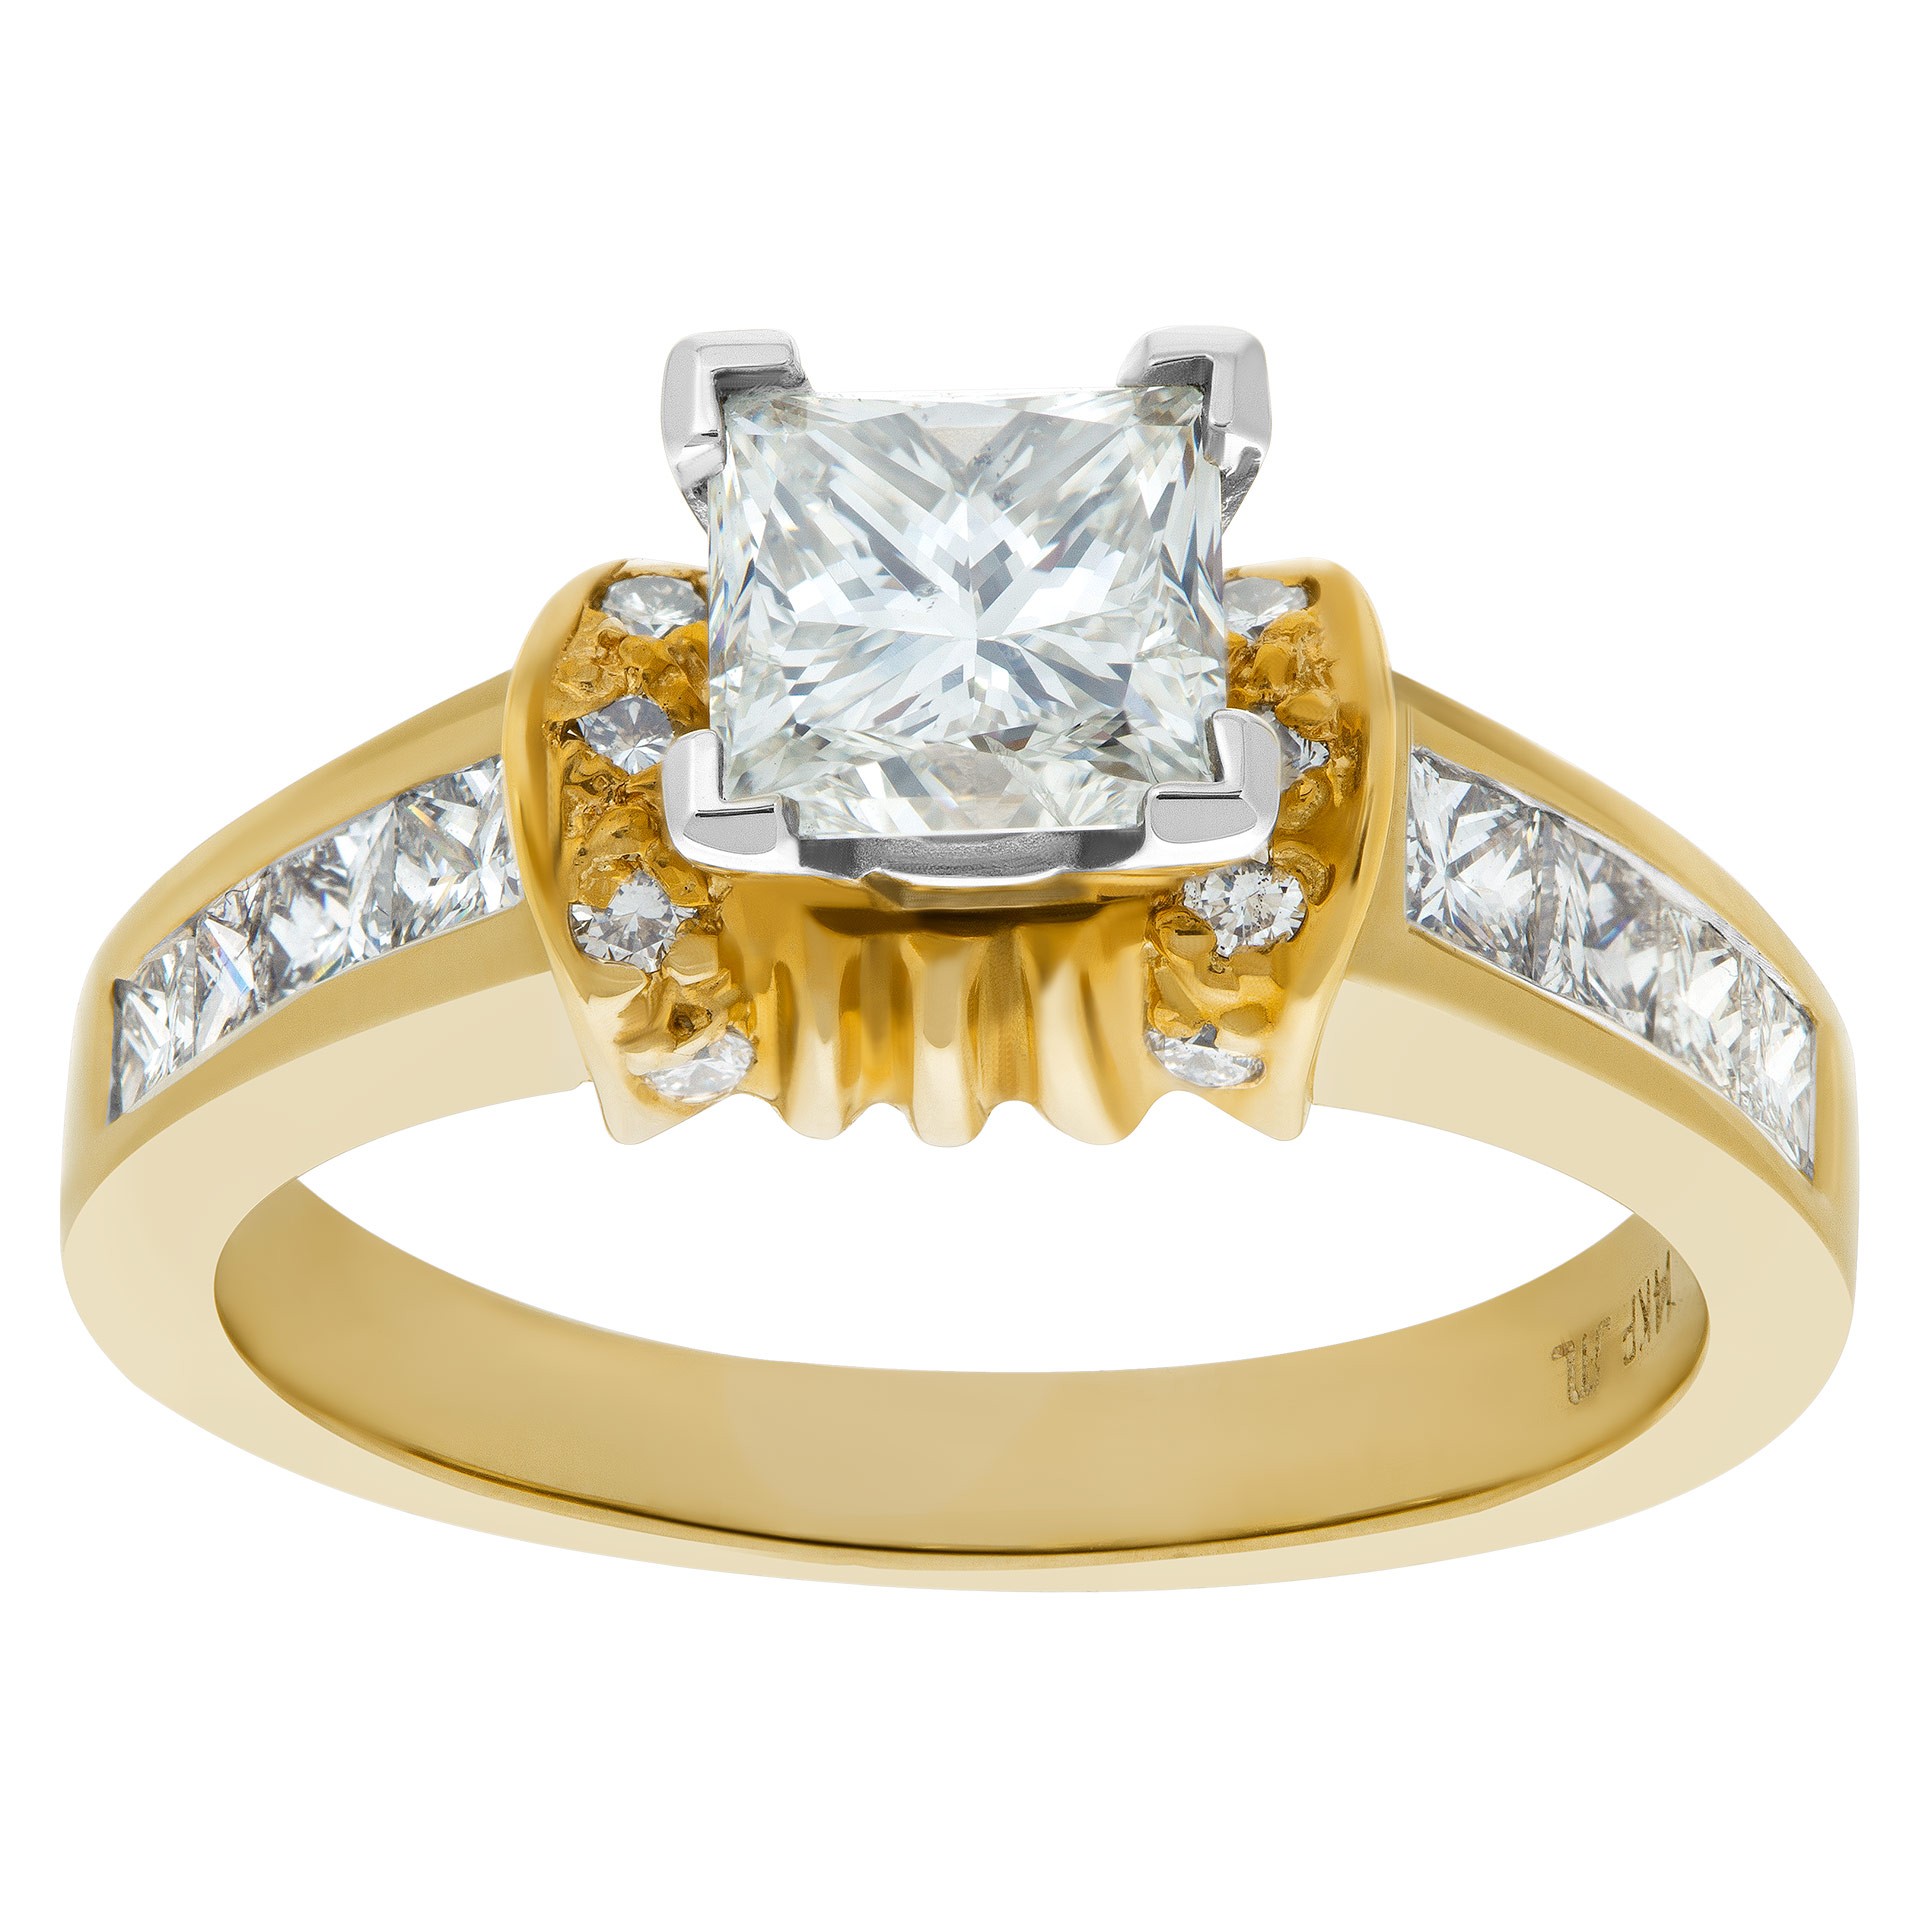 GIA Certified Square Modified Brilliant Diamond 1.28cts (I Color SI2 Clarity) ring set in 14k yellow and white gold . Size 6.75 image 1